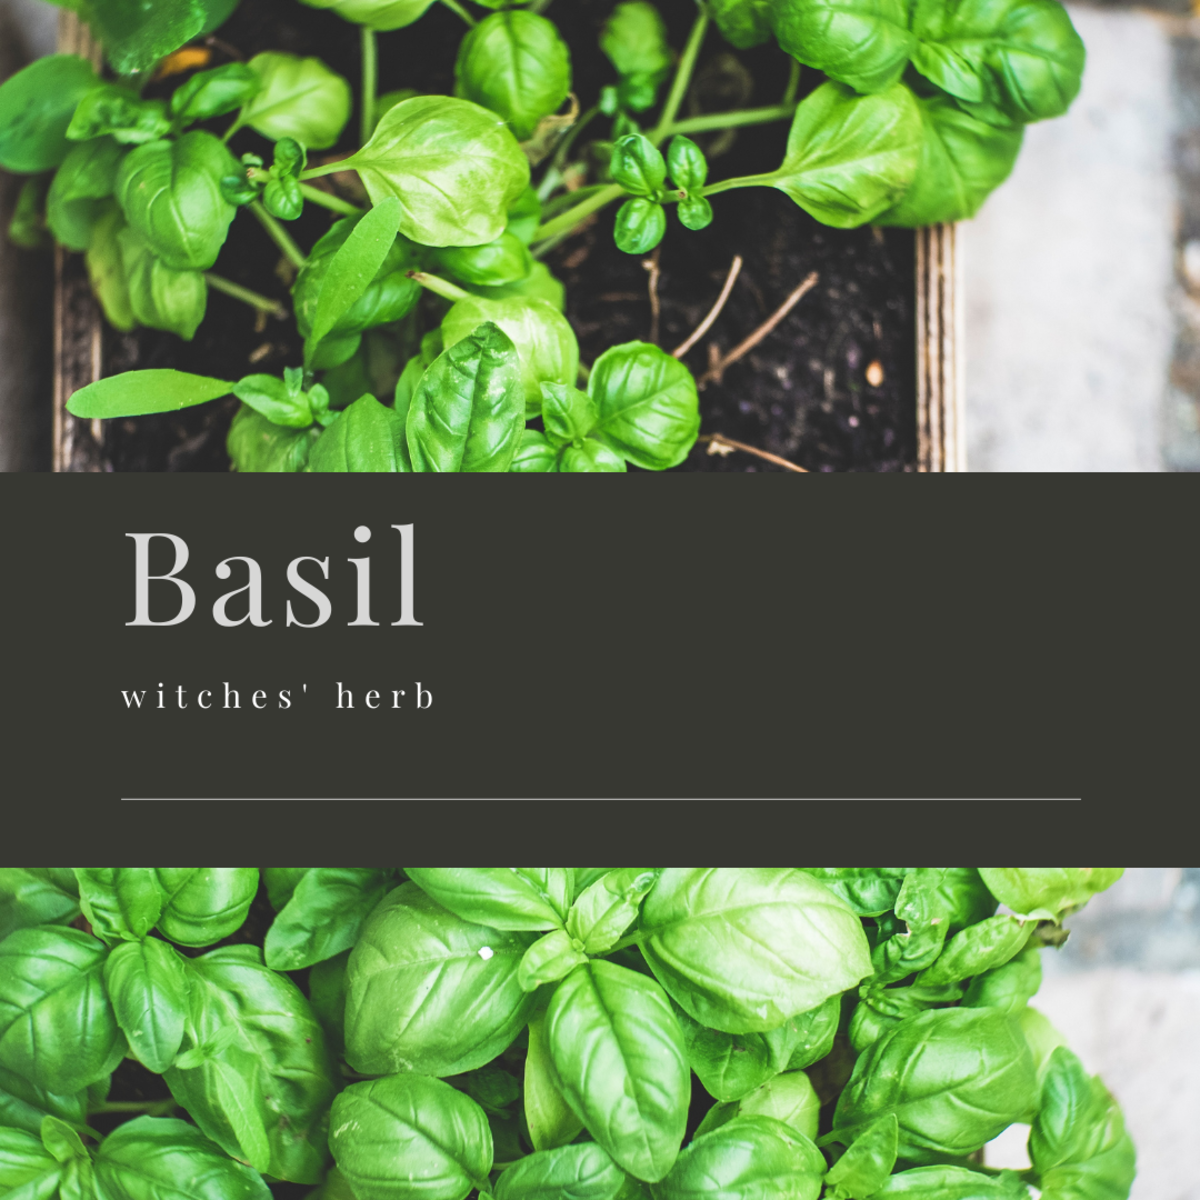 Basil is a household herb with its own secret name.